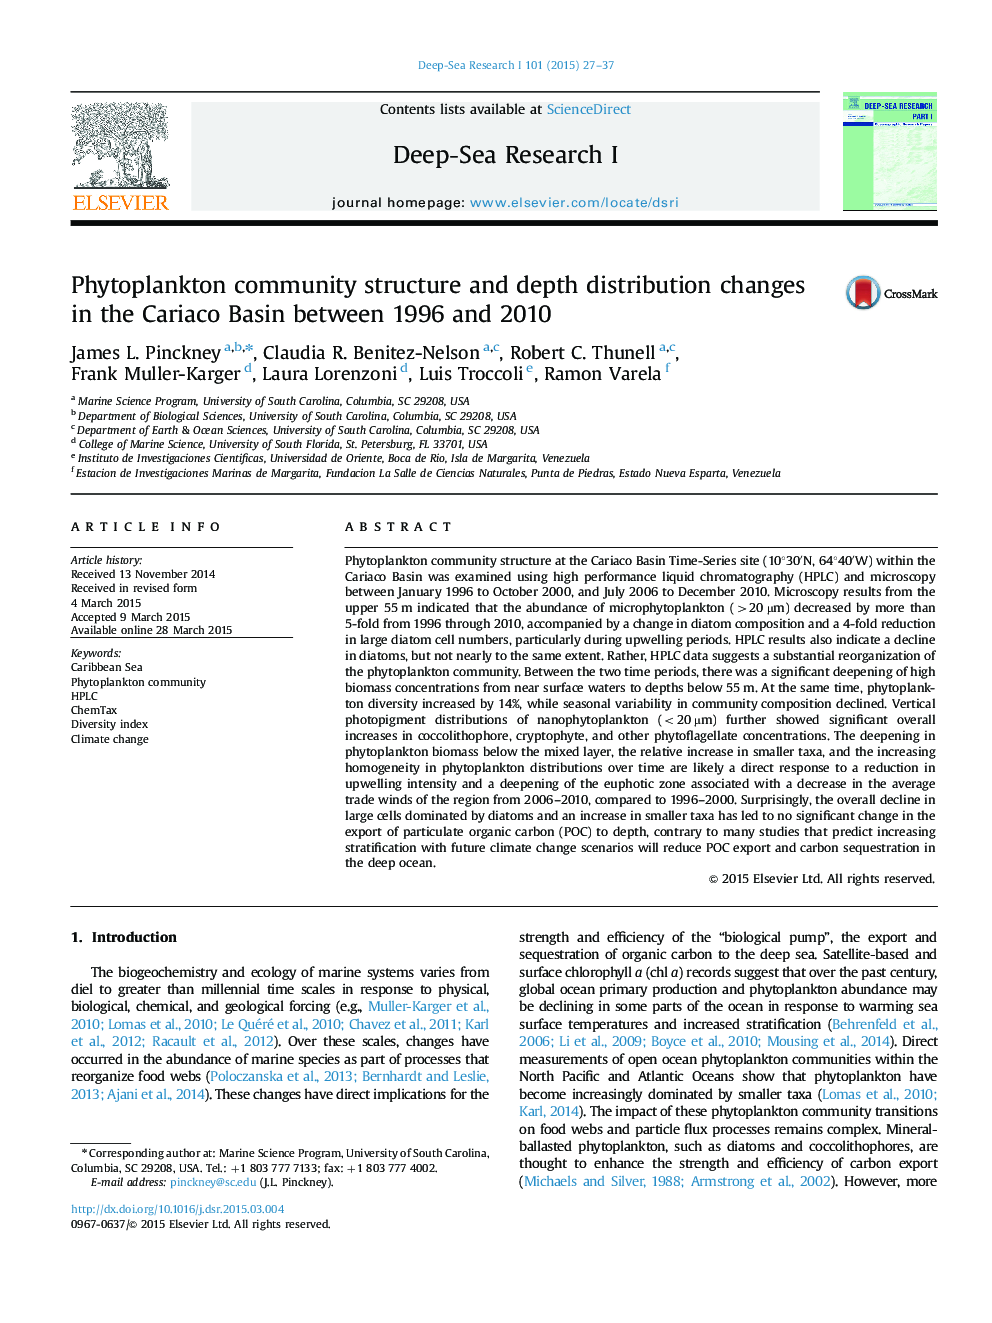 Phytoplankton community structure and depth distribution changes in the Cariaco Basin between 1996 and 2010